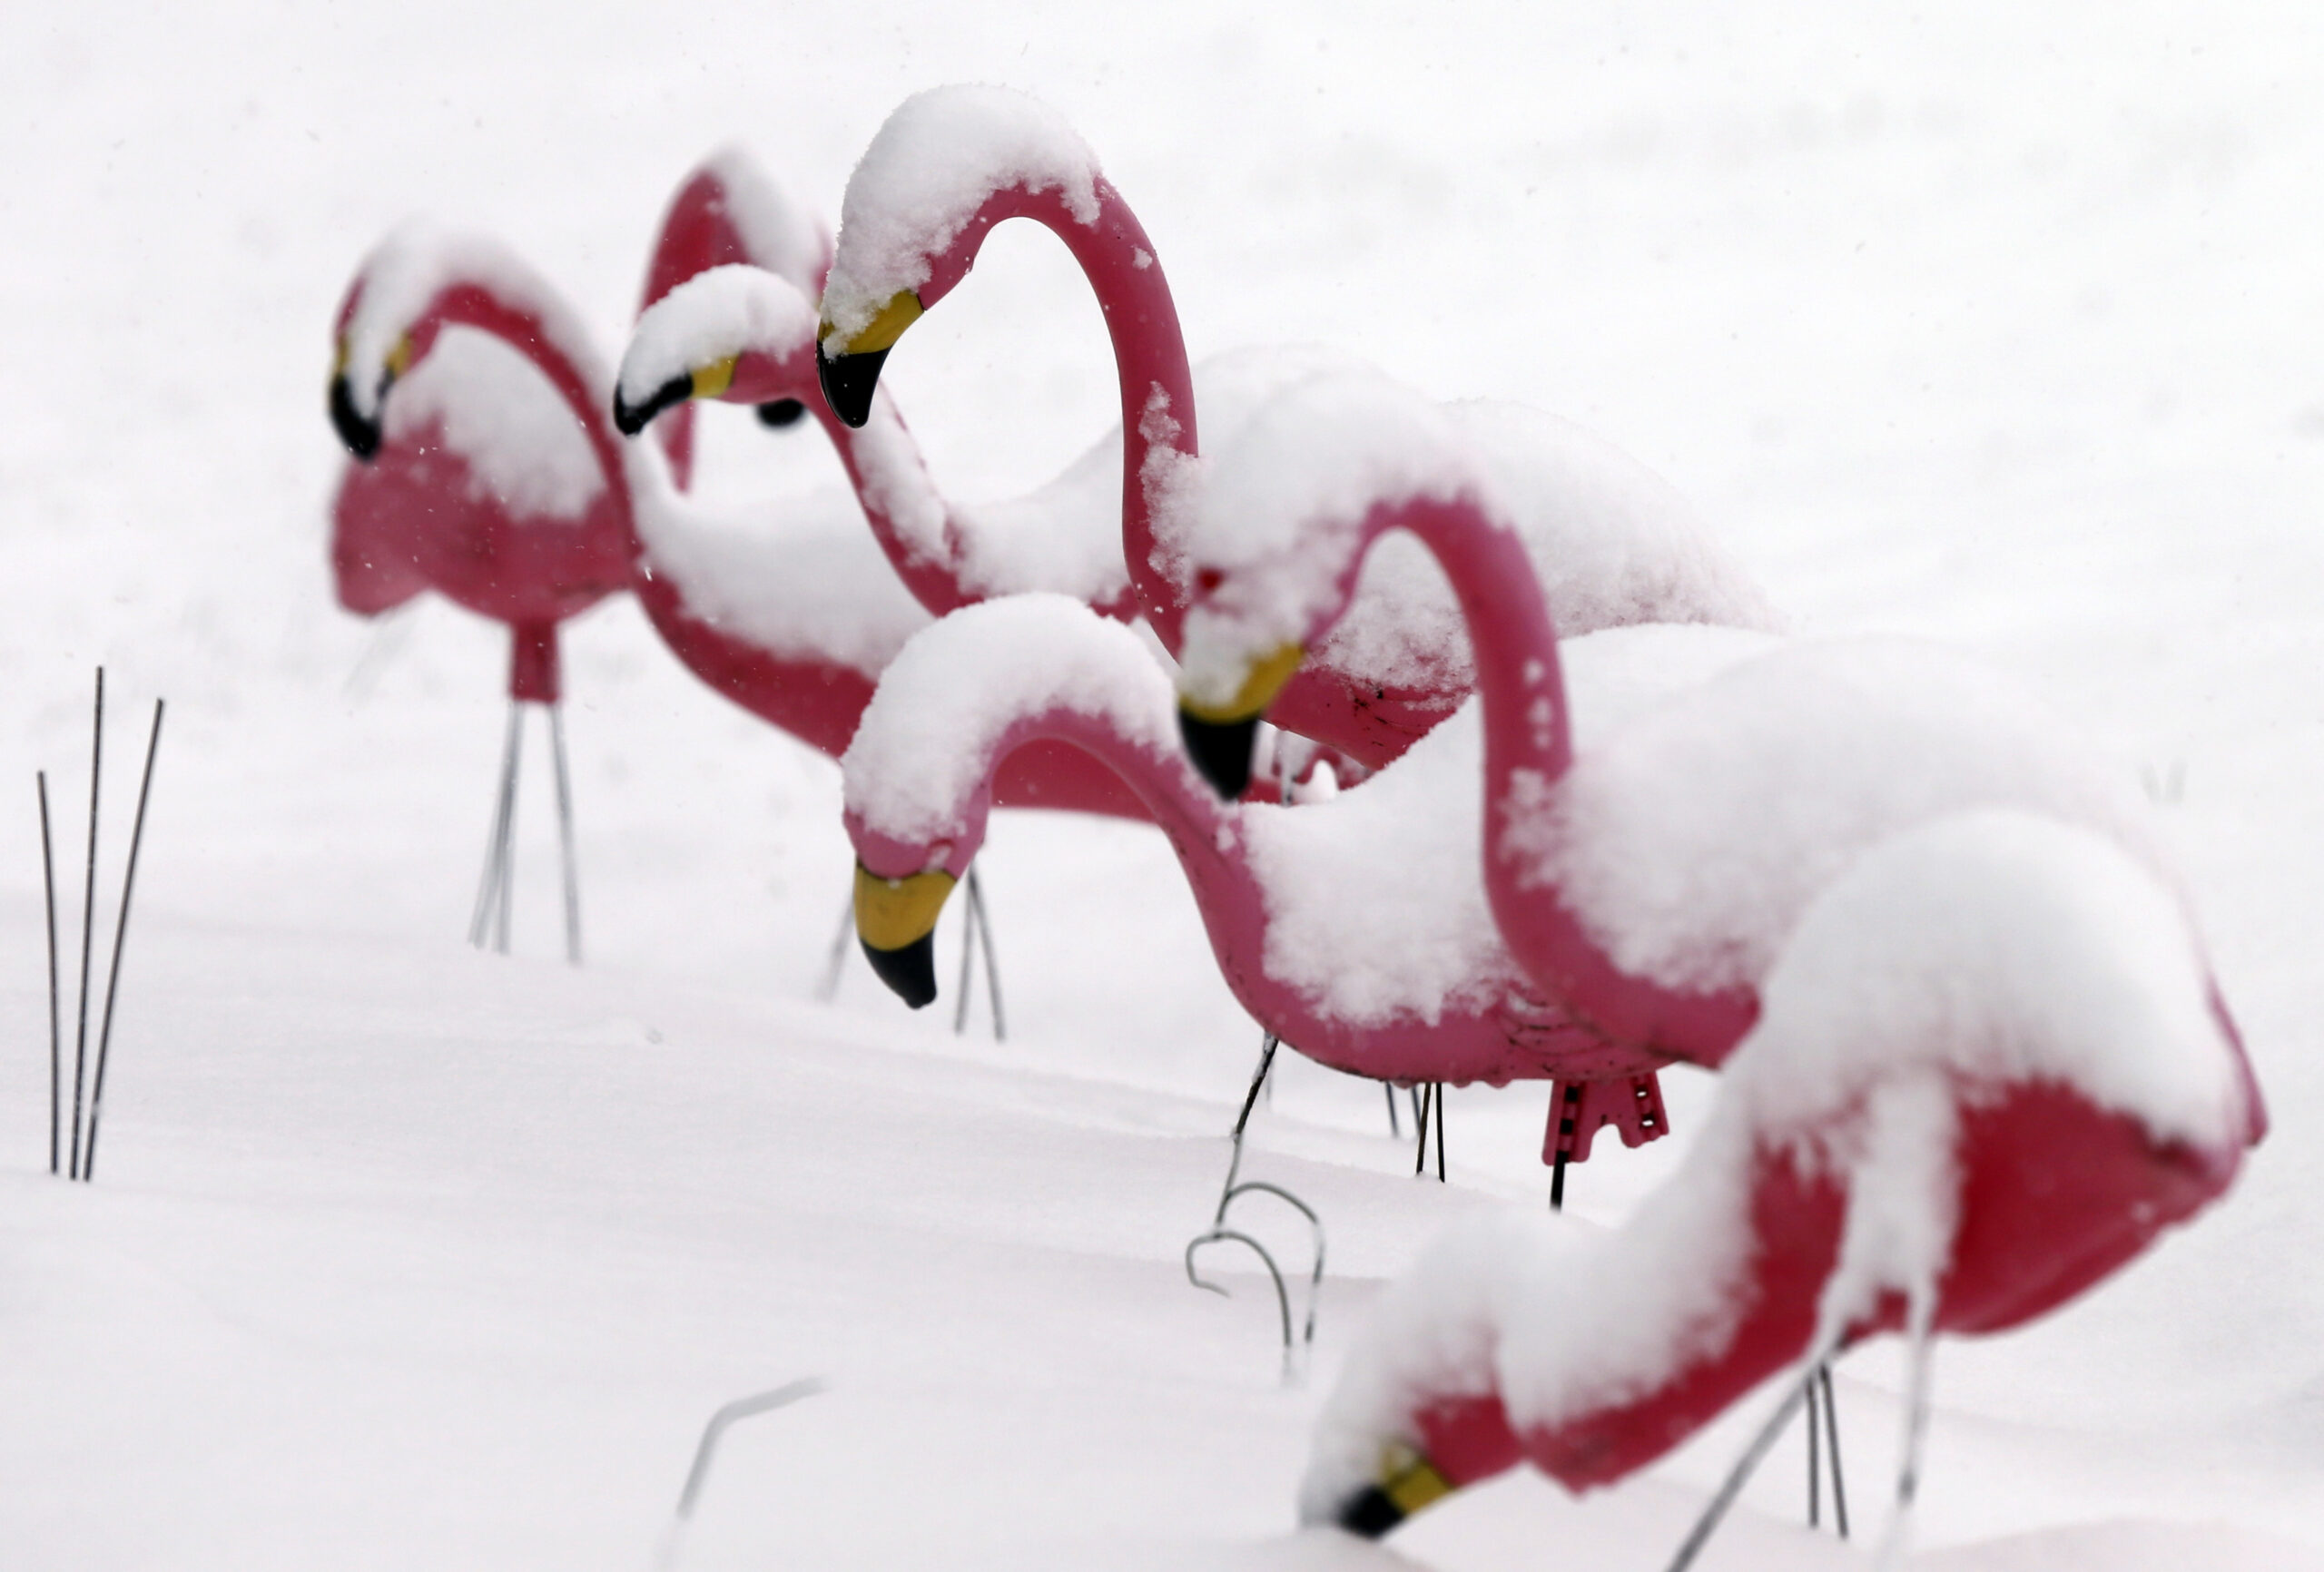 Flamingos covered in snow